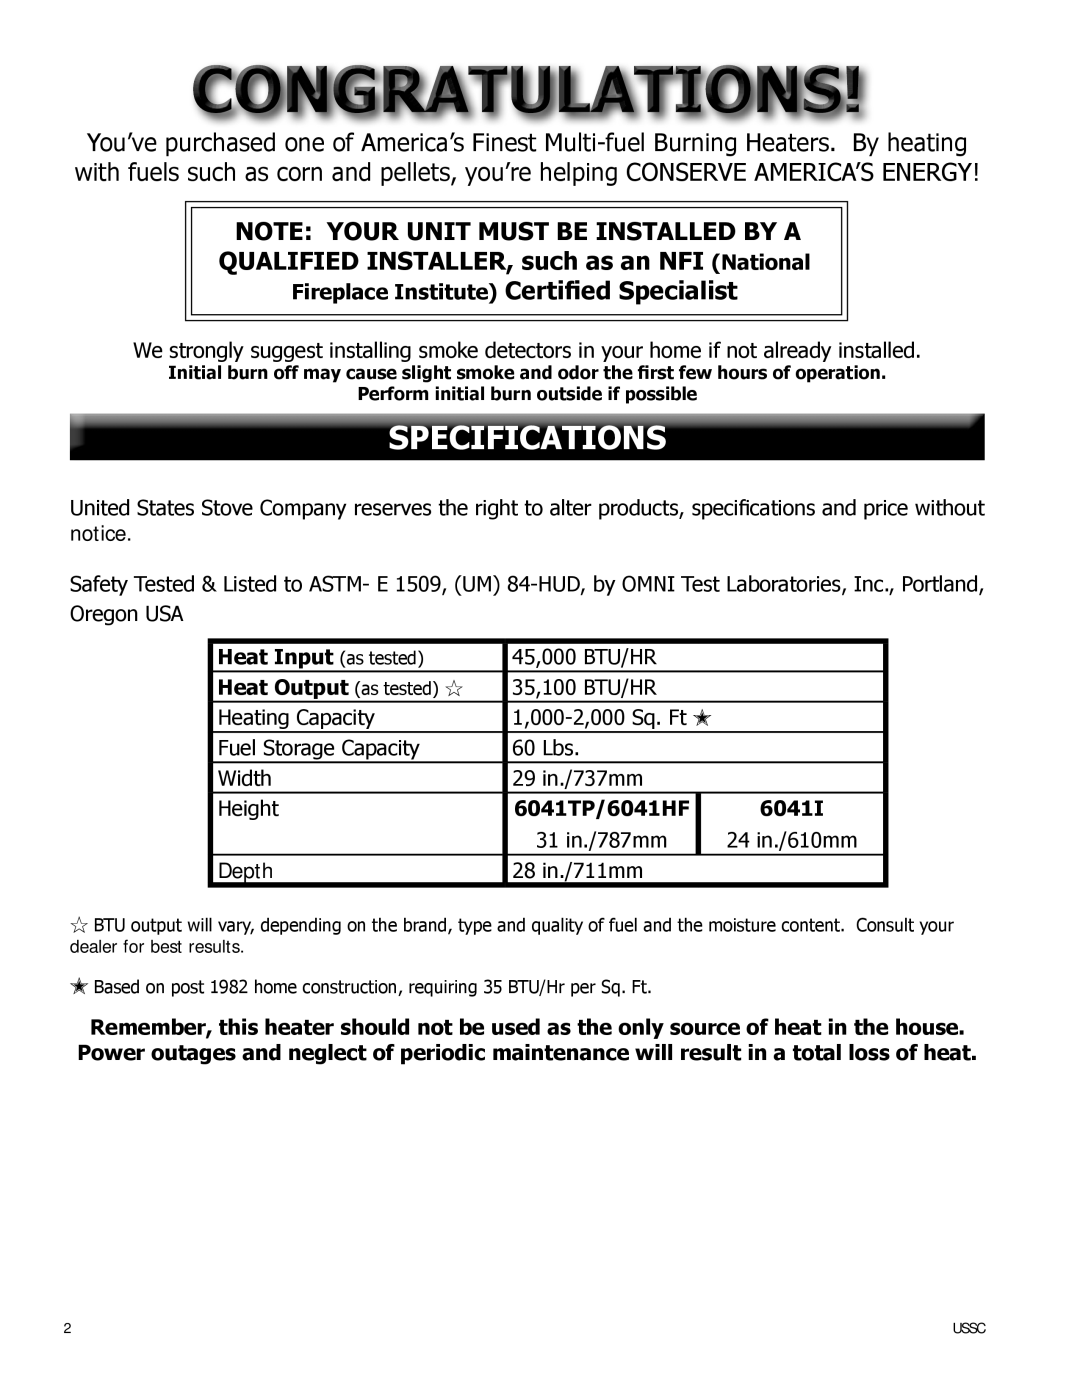 United States Stove 6041 Specifications, Note Your Unit Must Be Installed By A, Certified Specialist, Heat Input as tested 